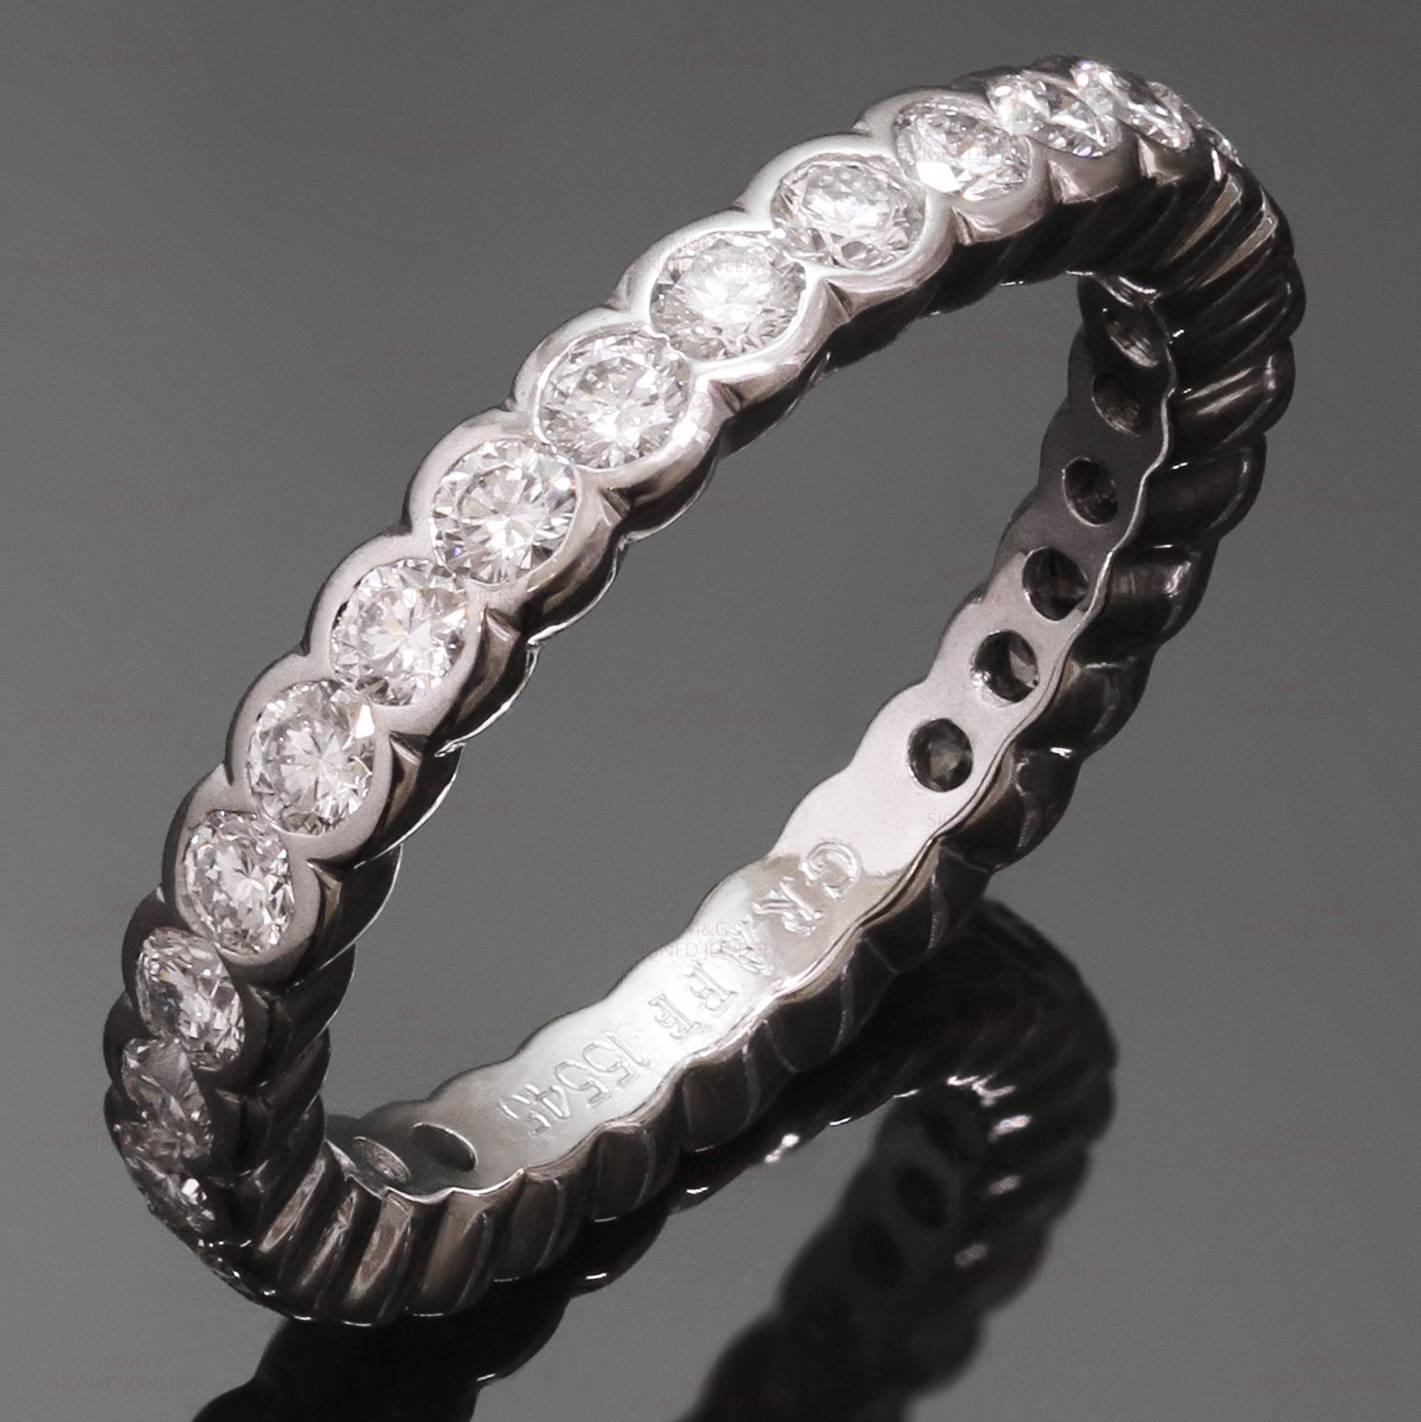 This classic Graff eternity band from the elegant Scallop collection is crafted in 18k white gold and set with round brilliant-cut diamonds of an estimated 1.20 carats. Made in United Kingdom circa 2010s. Measurements: 0.11" (3mm) width. The